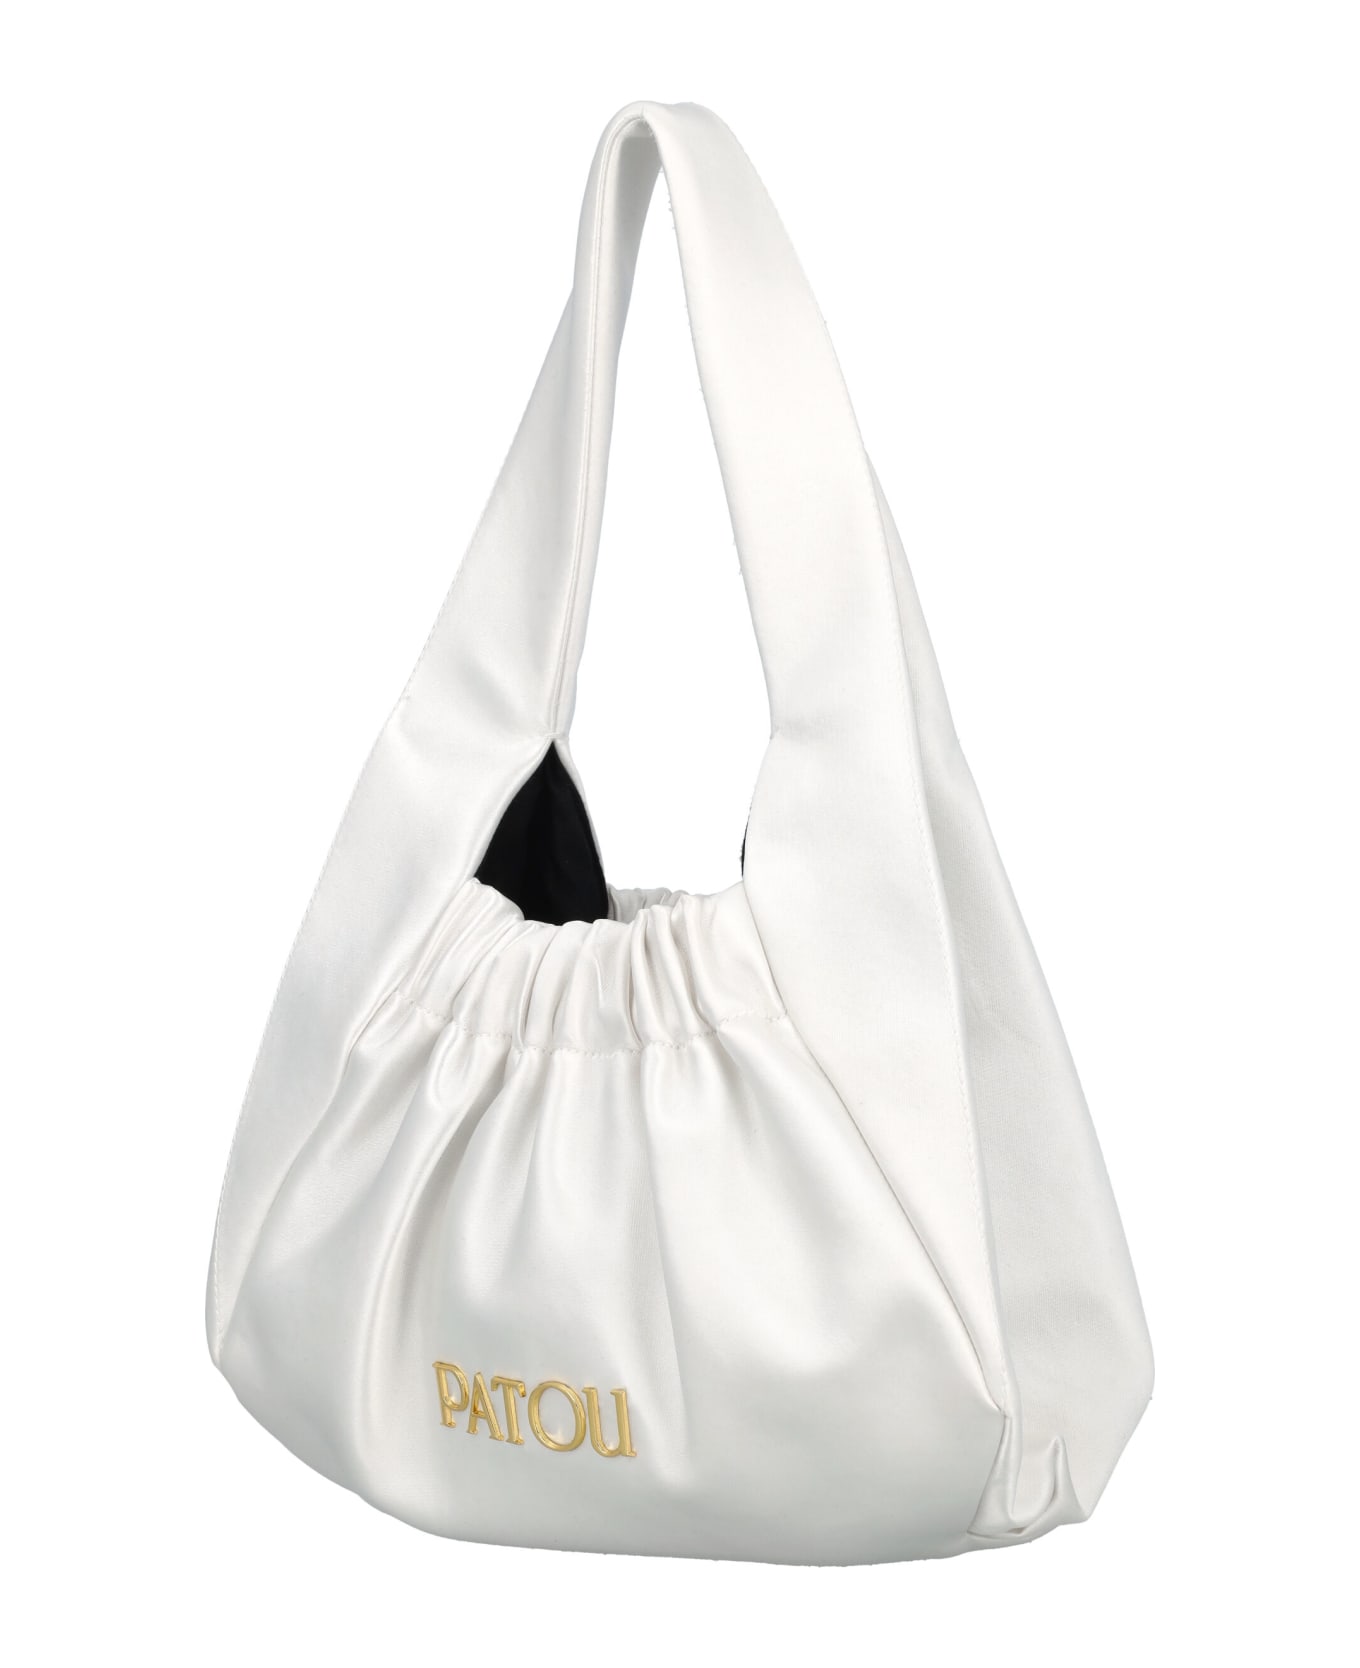 Patou Le Biscuit Bag - WHITE トートバッグ